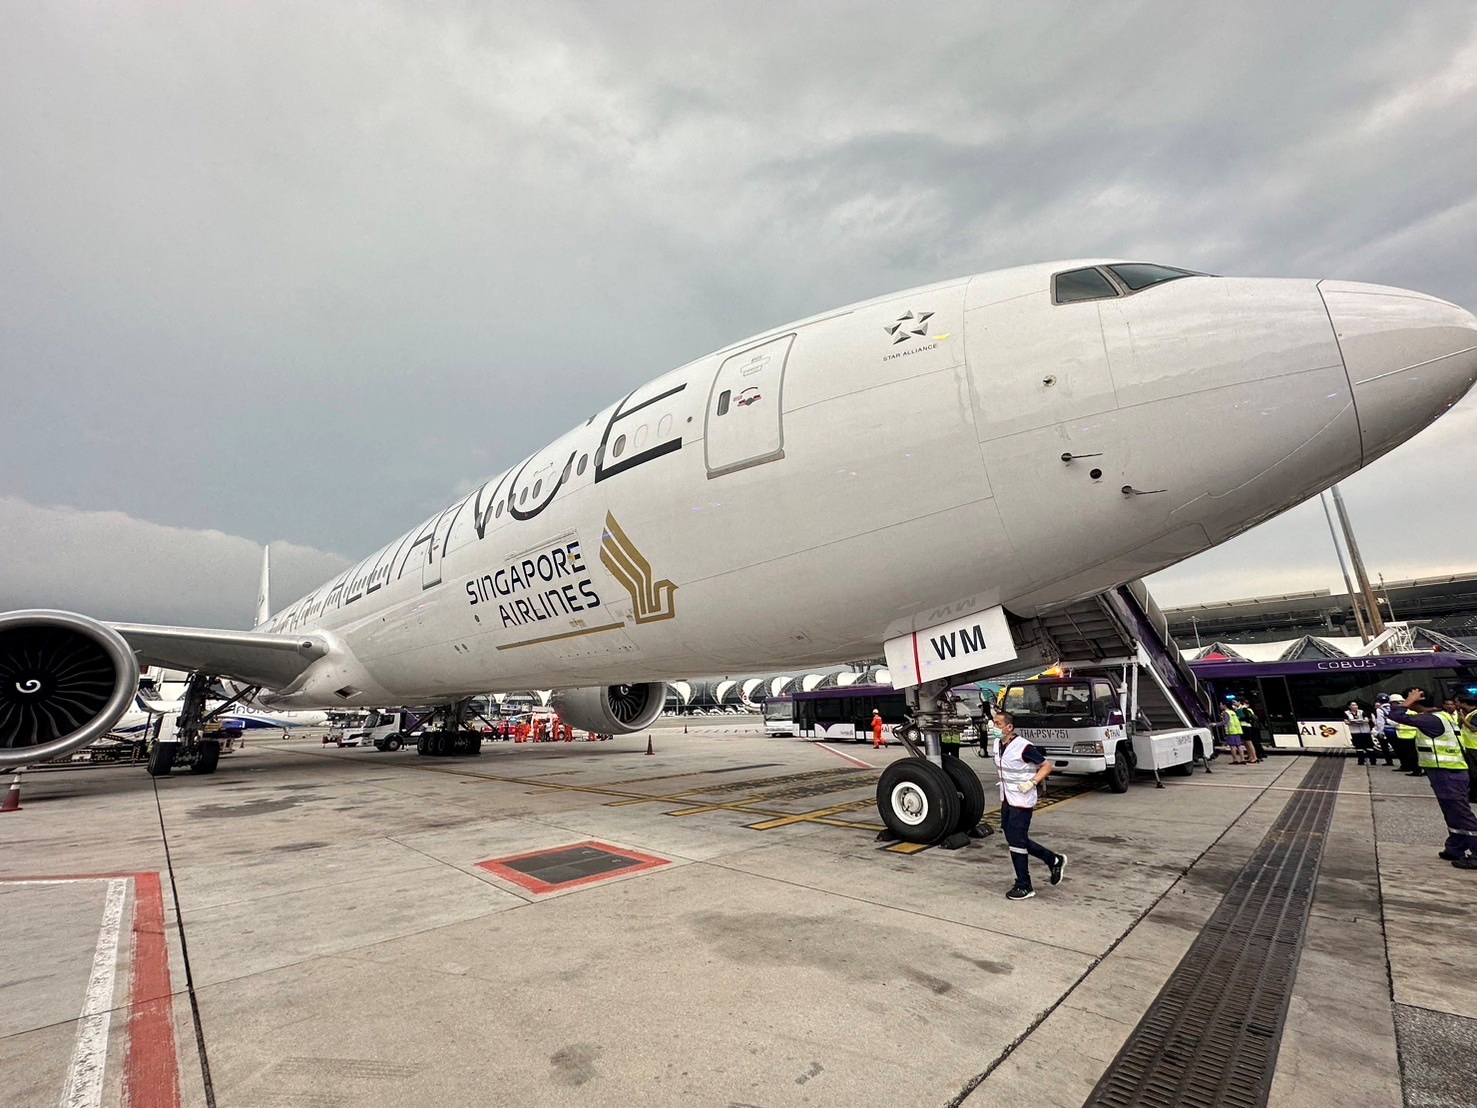 A Singapore Airlines aircraft is seen on tarmac after requesting an emergency landing at Bangkok's Suvarnabhumi International airport, Thailand